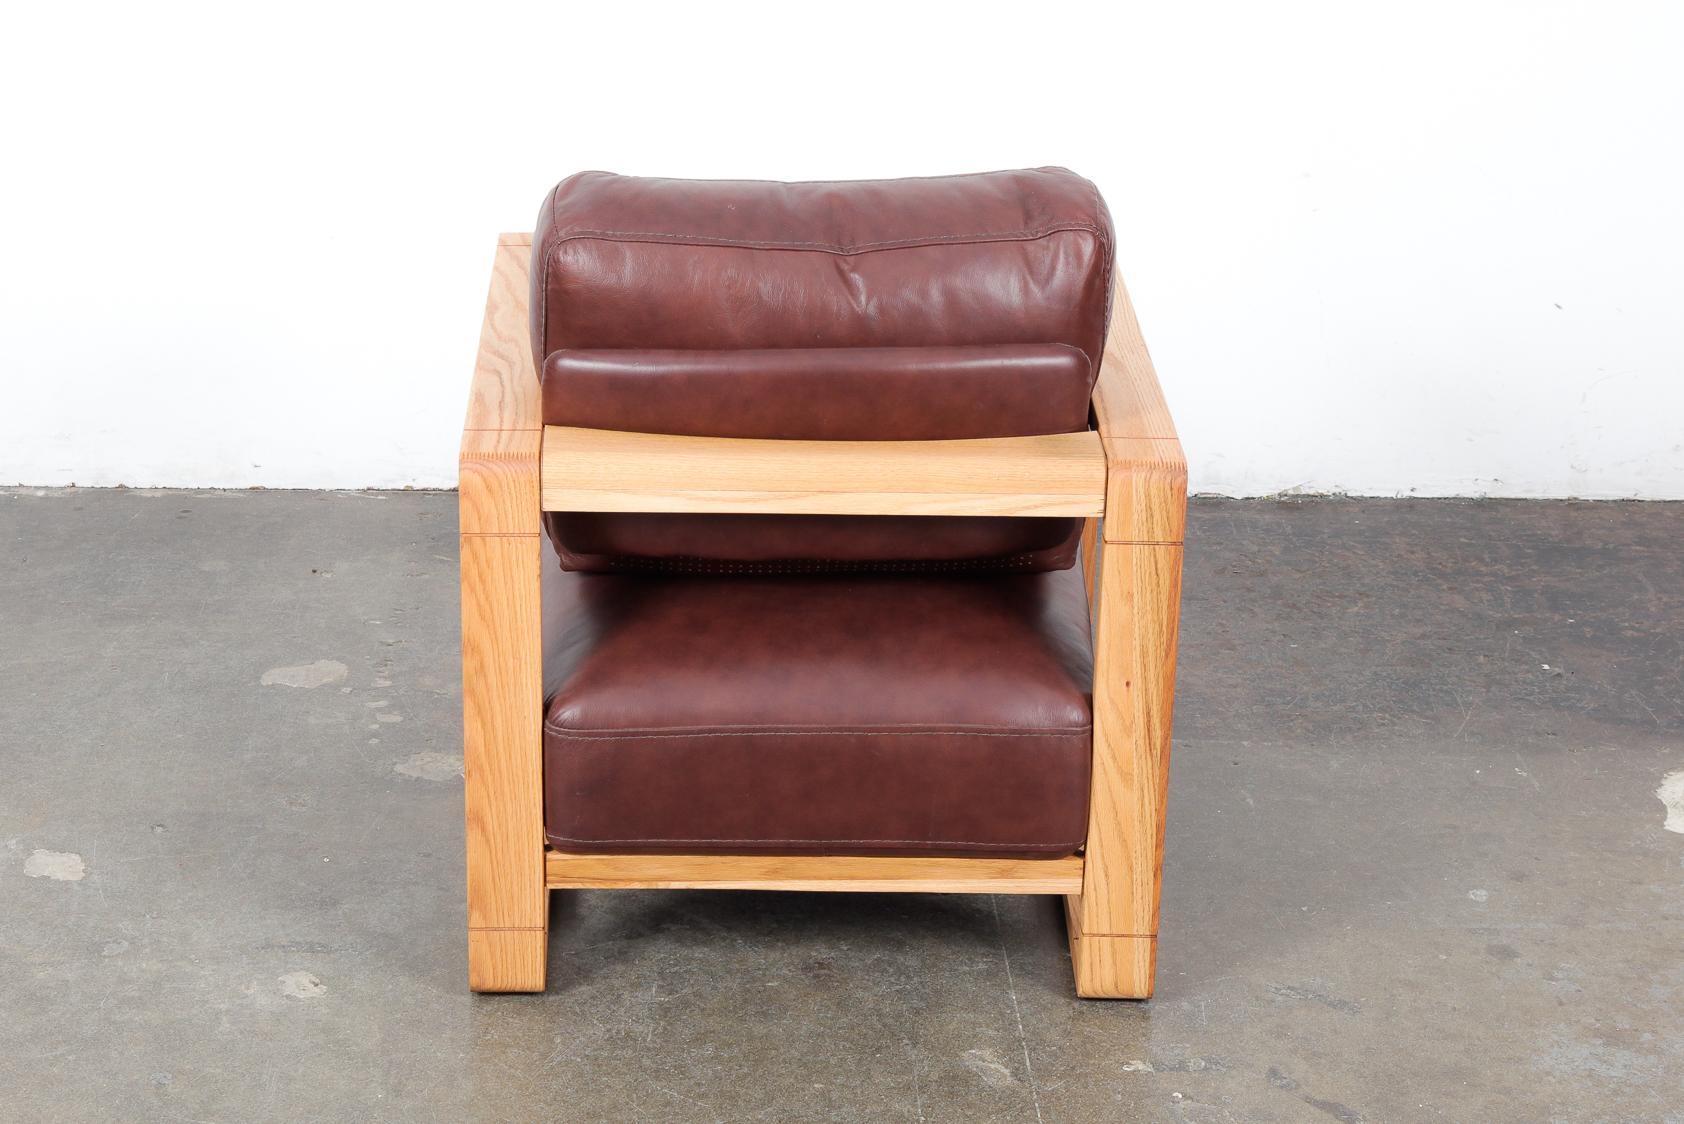 Late 20th Century Swedish Solid Oak Framed Lounge Chair with Original Brown Leather